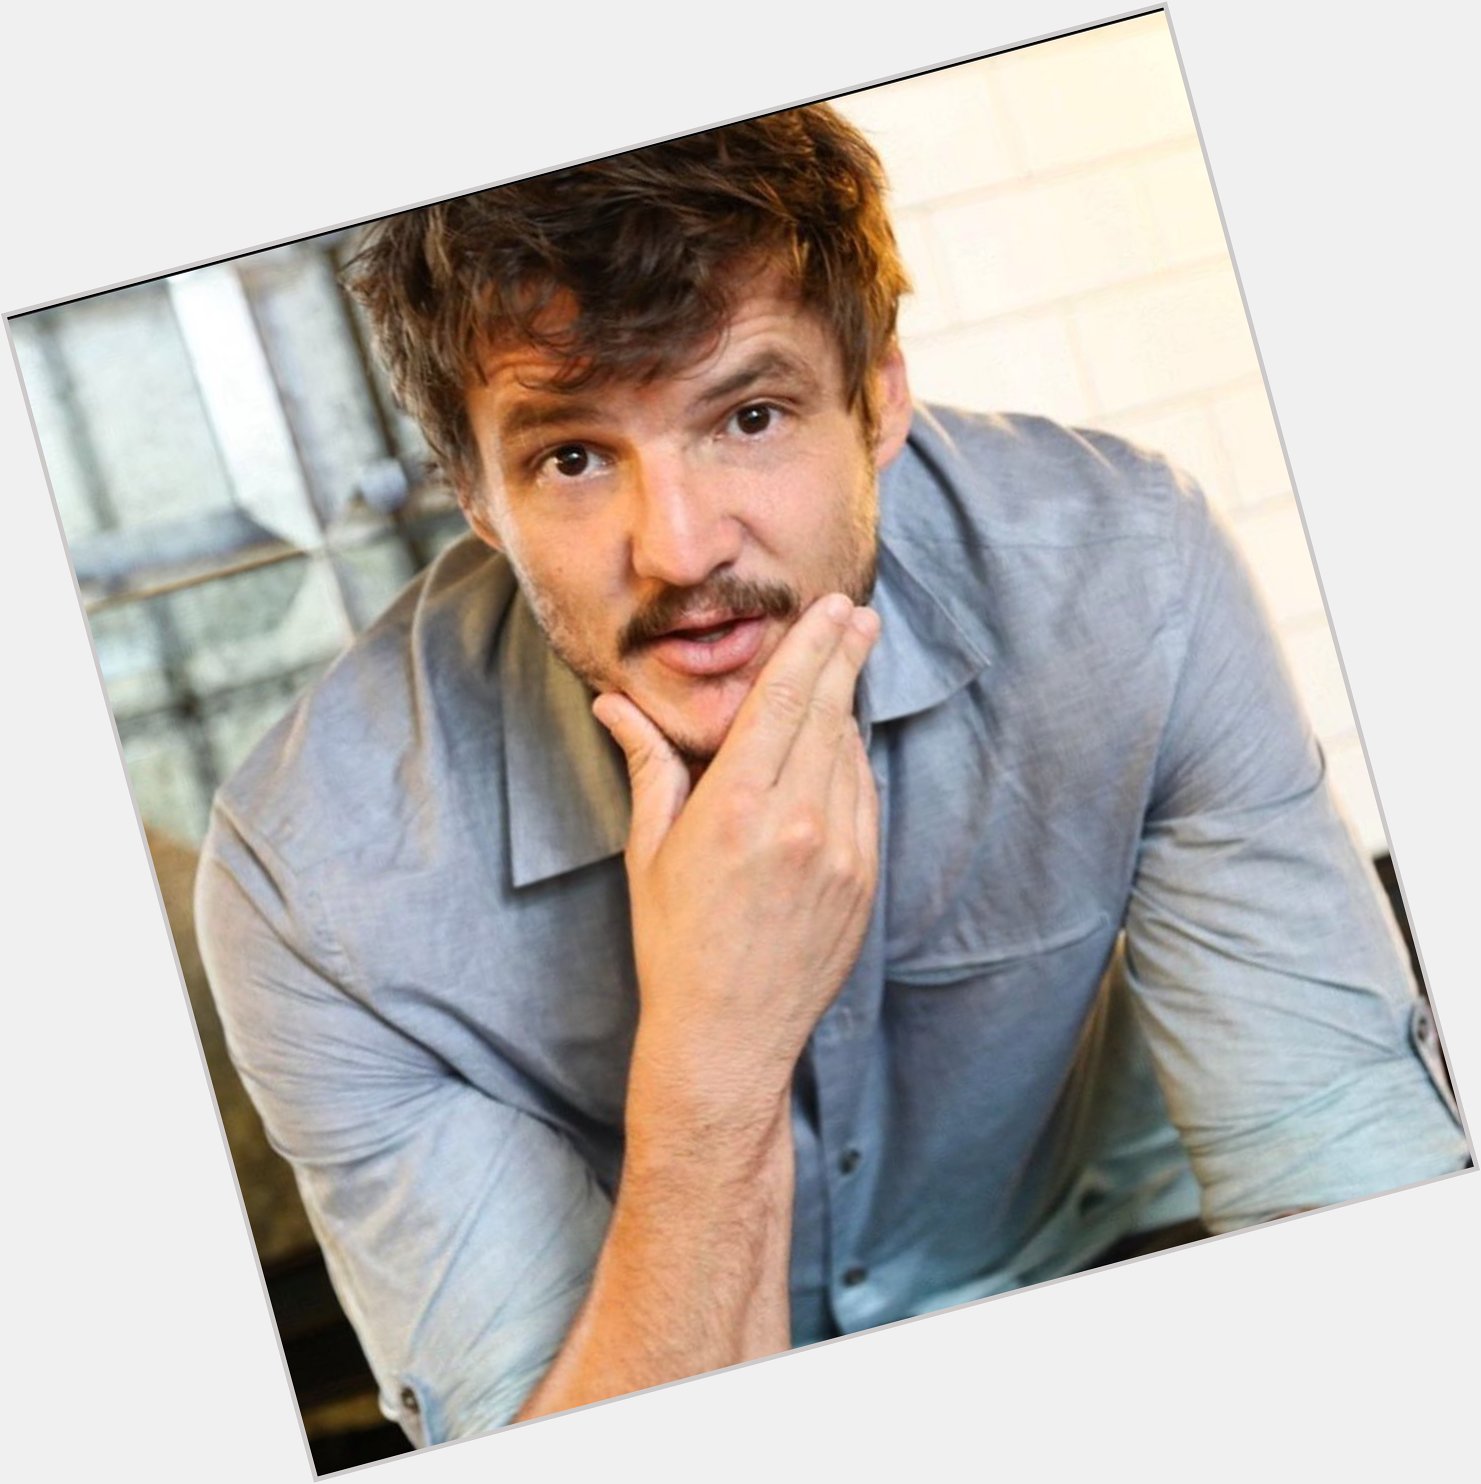 HAPPY BIRTHDAY TO PEDRO PASCAL!!! HOPE HE S HAVING AN AMAZING DAY <3 